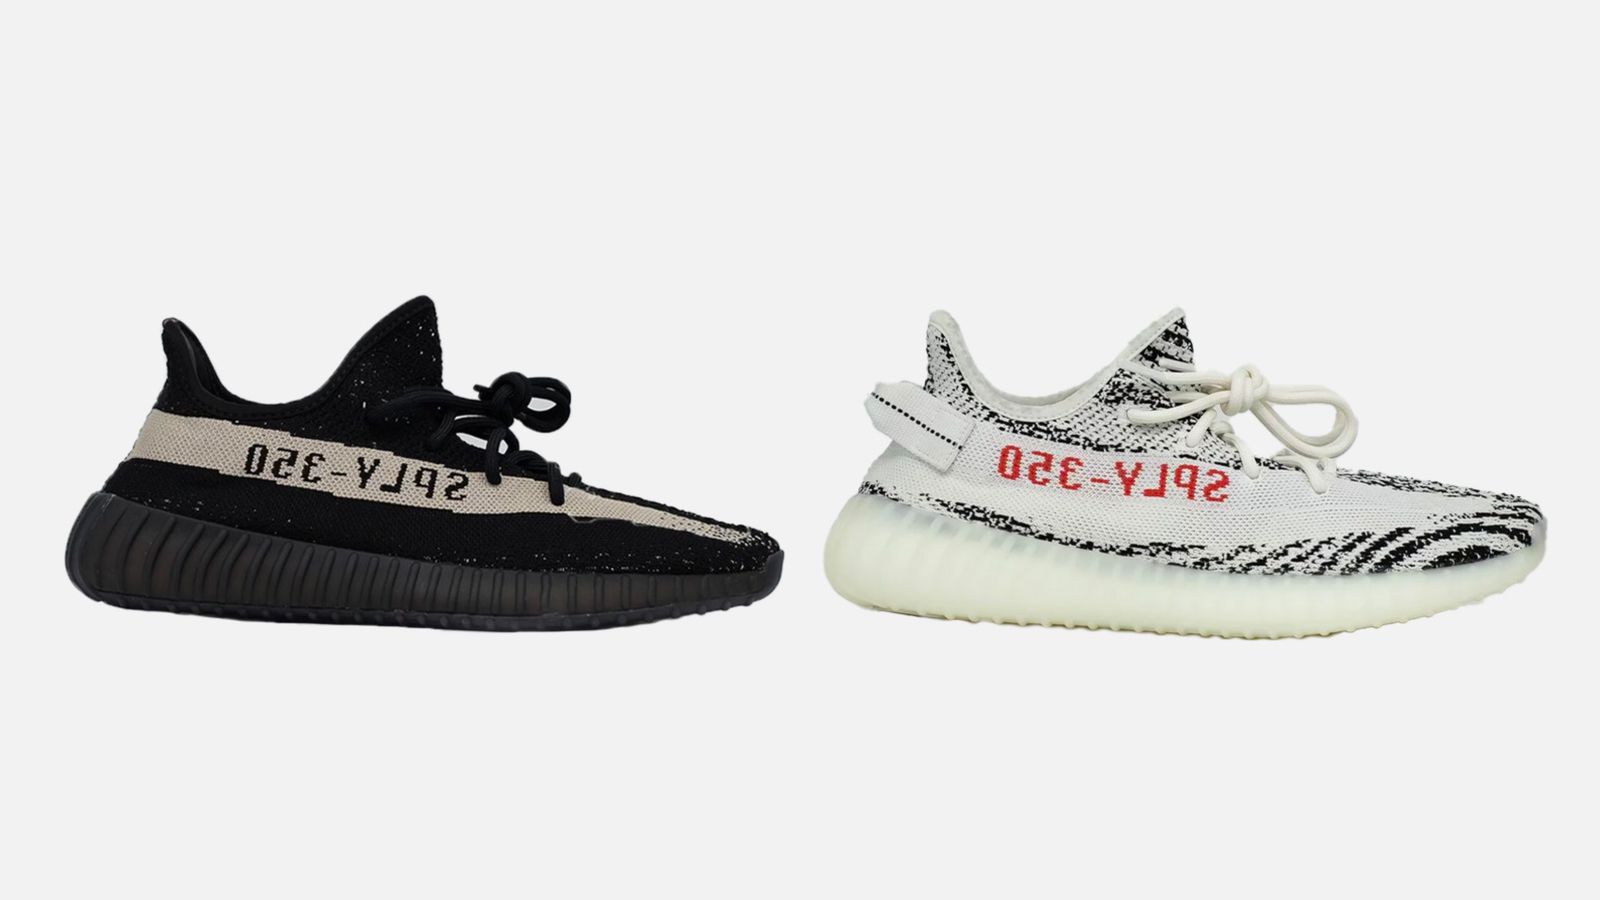 Adidas won't burn unsold Yeezy products but will likely donate